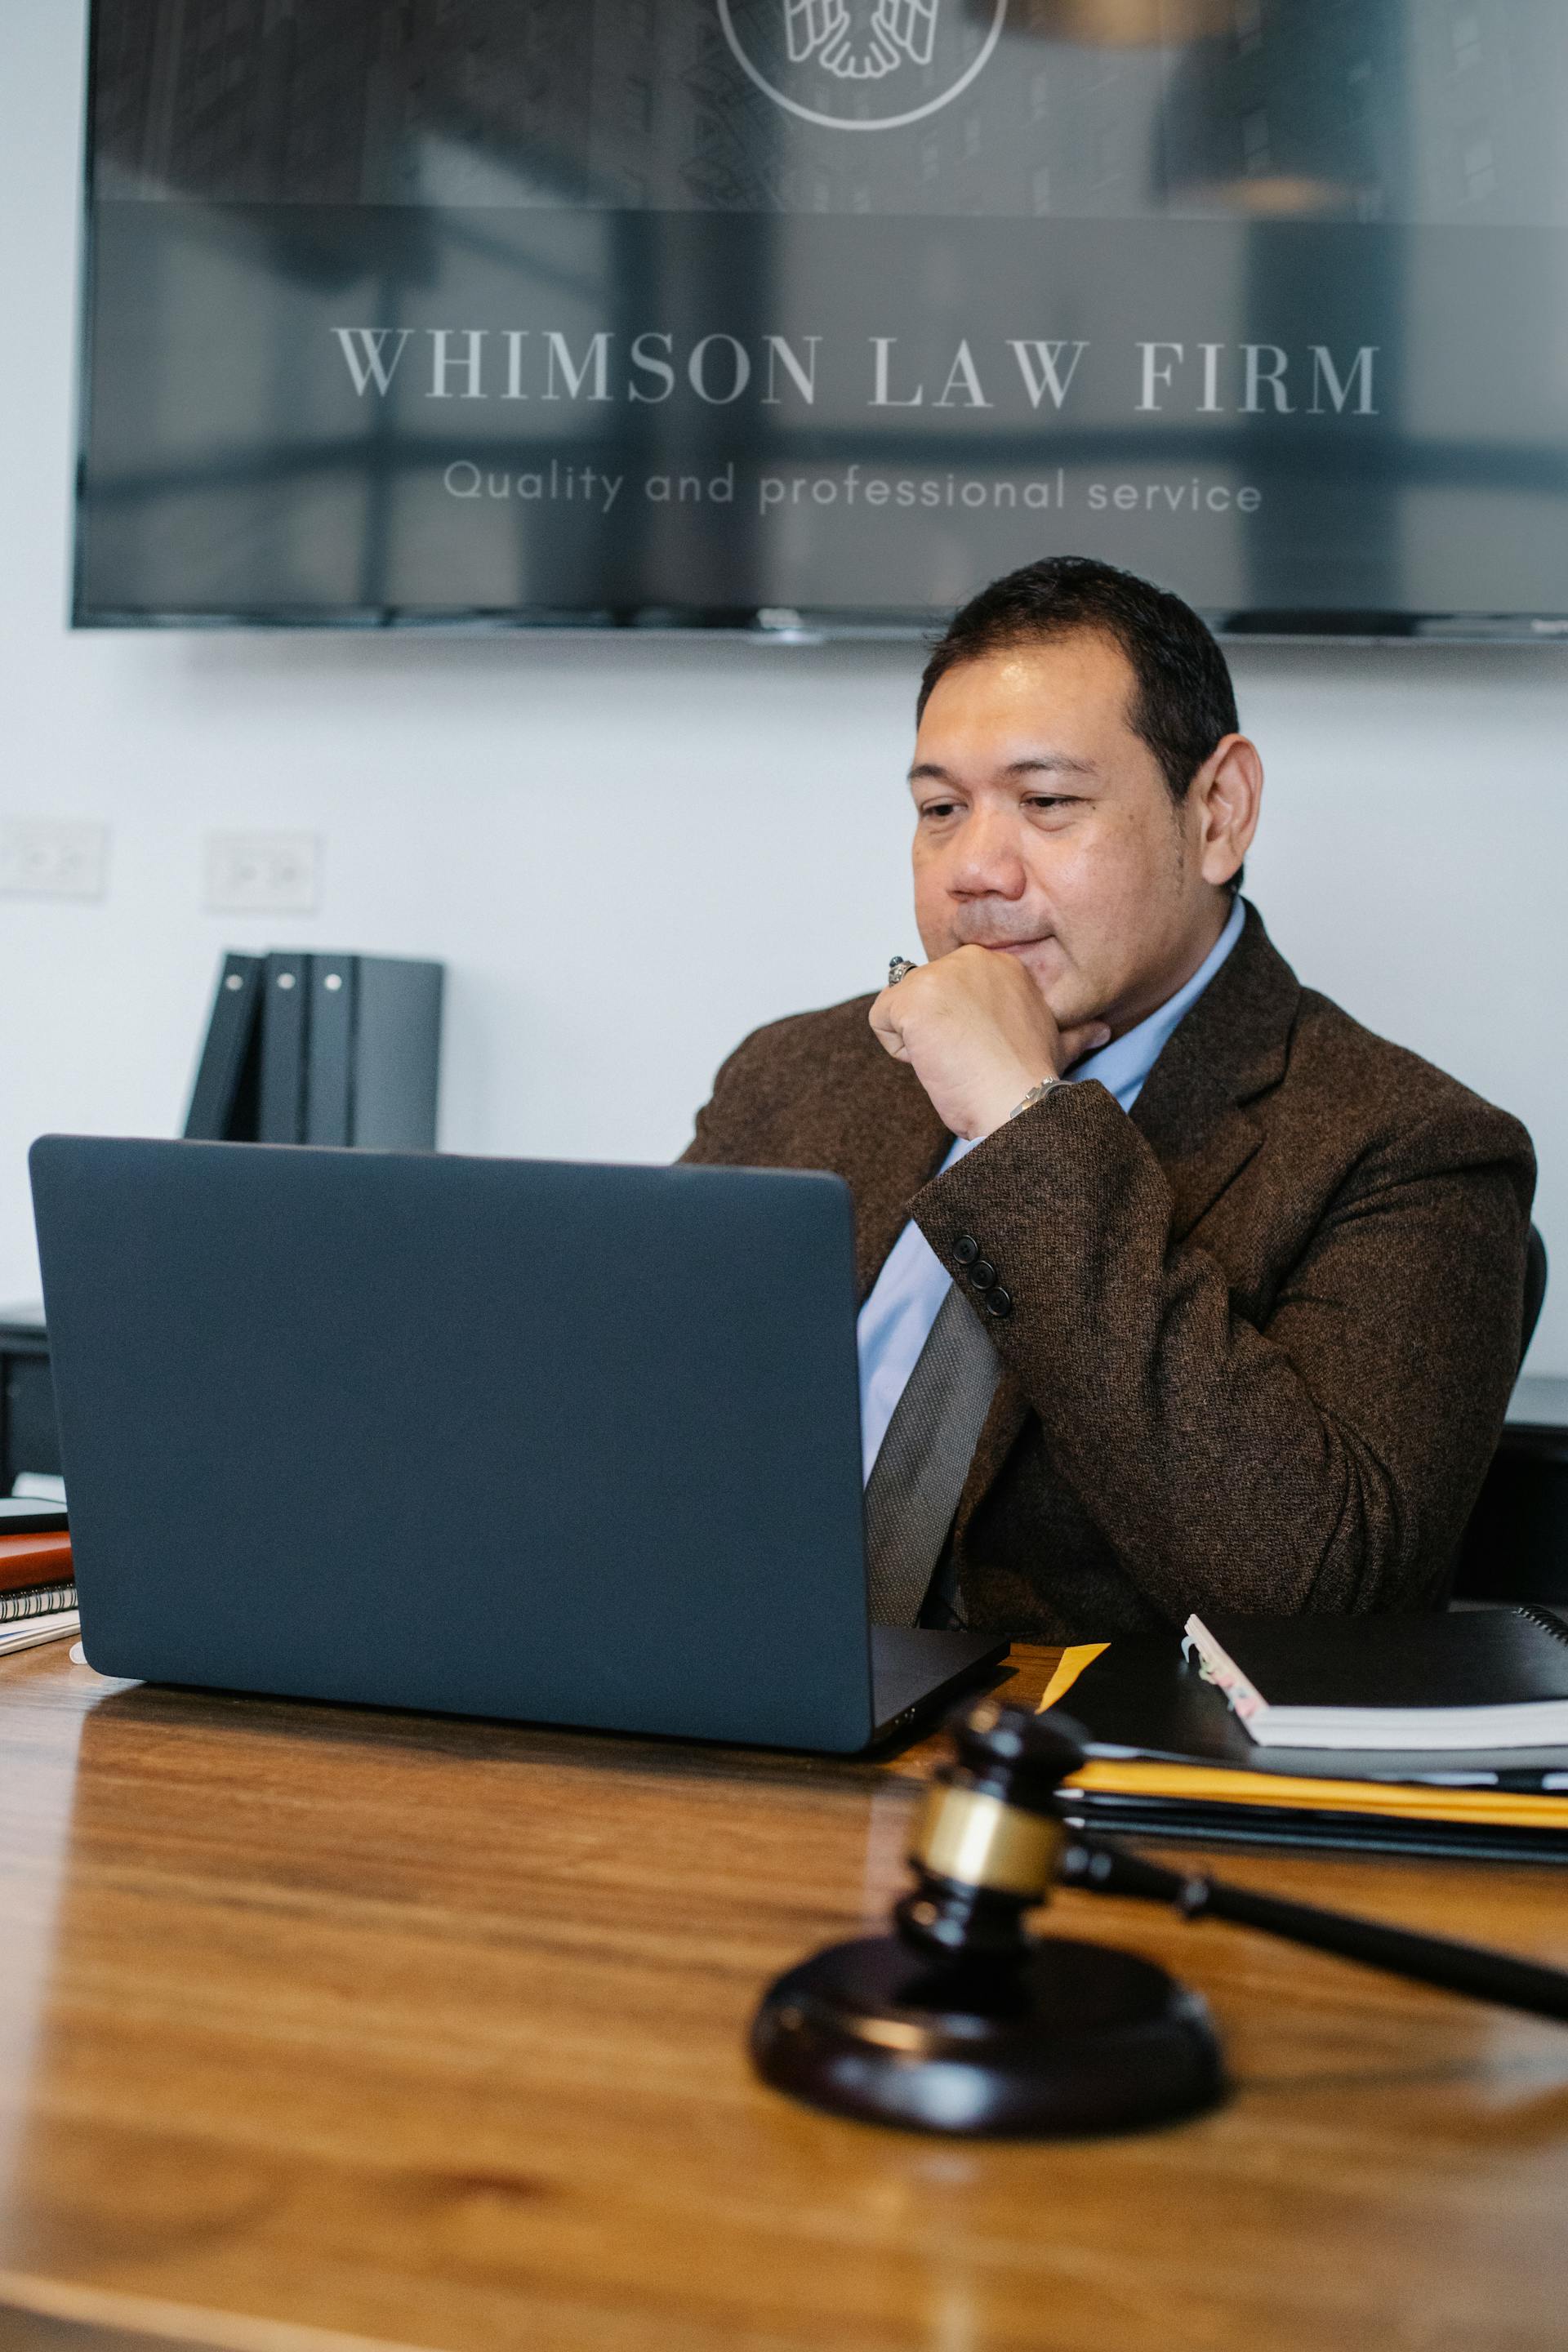 A male lawyer using a laptop in his office | Source: Pexels